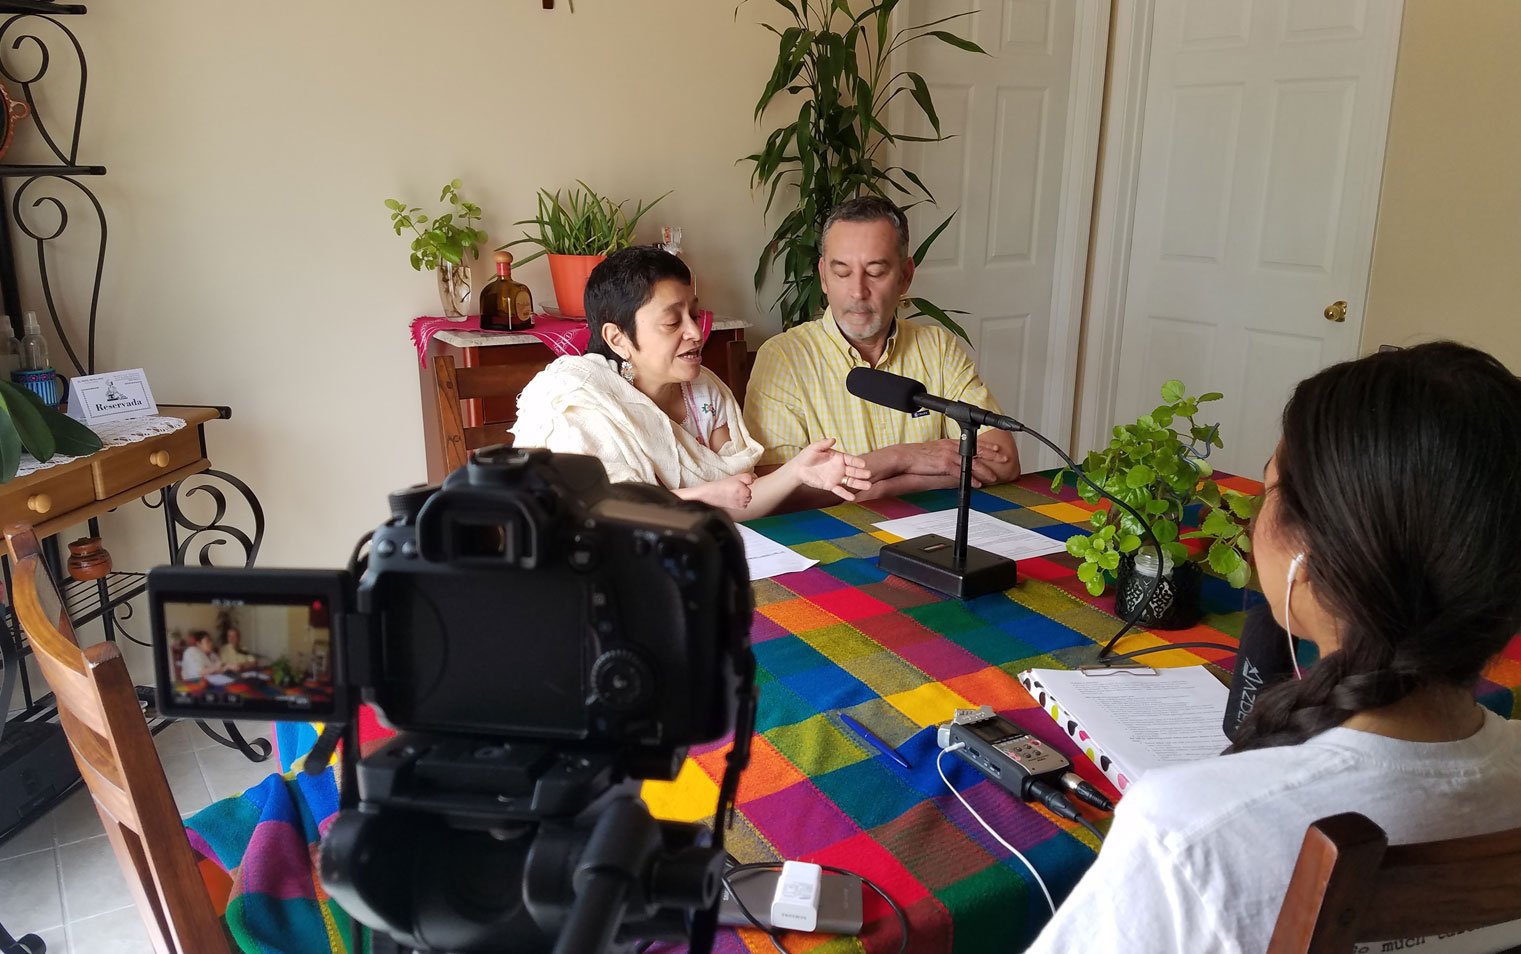 Norma Rosas and Manuel Apodaca and Norma Rosas, professors at the University of Southern Indiana, being interviewed by Paola Marizan for the first episode of podcast ¿Qué pasa, Midwest?